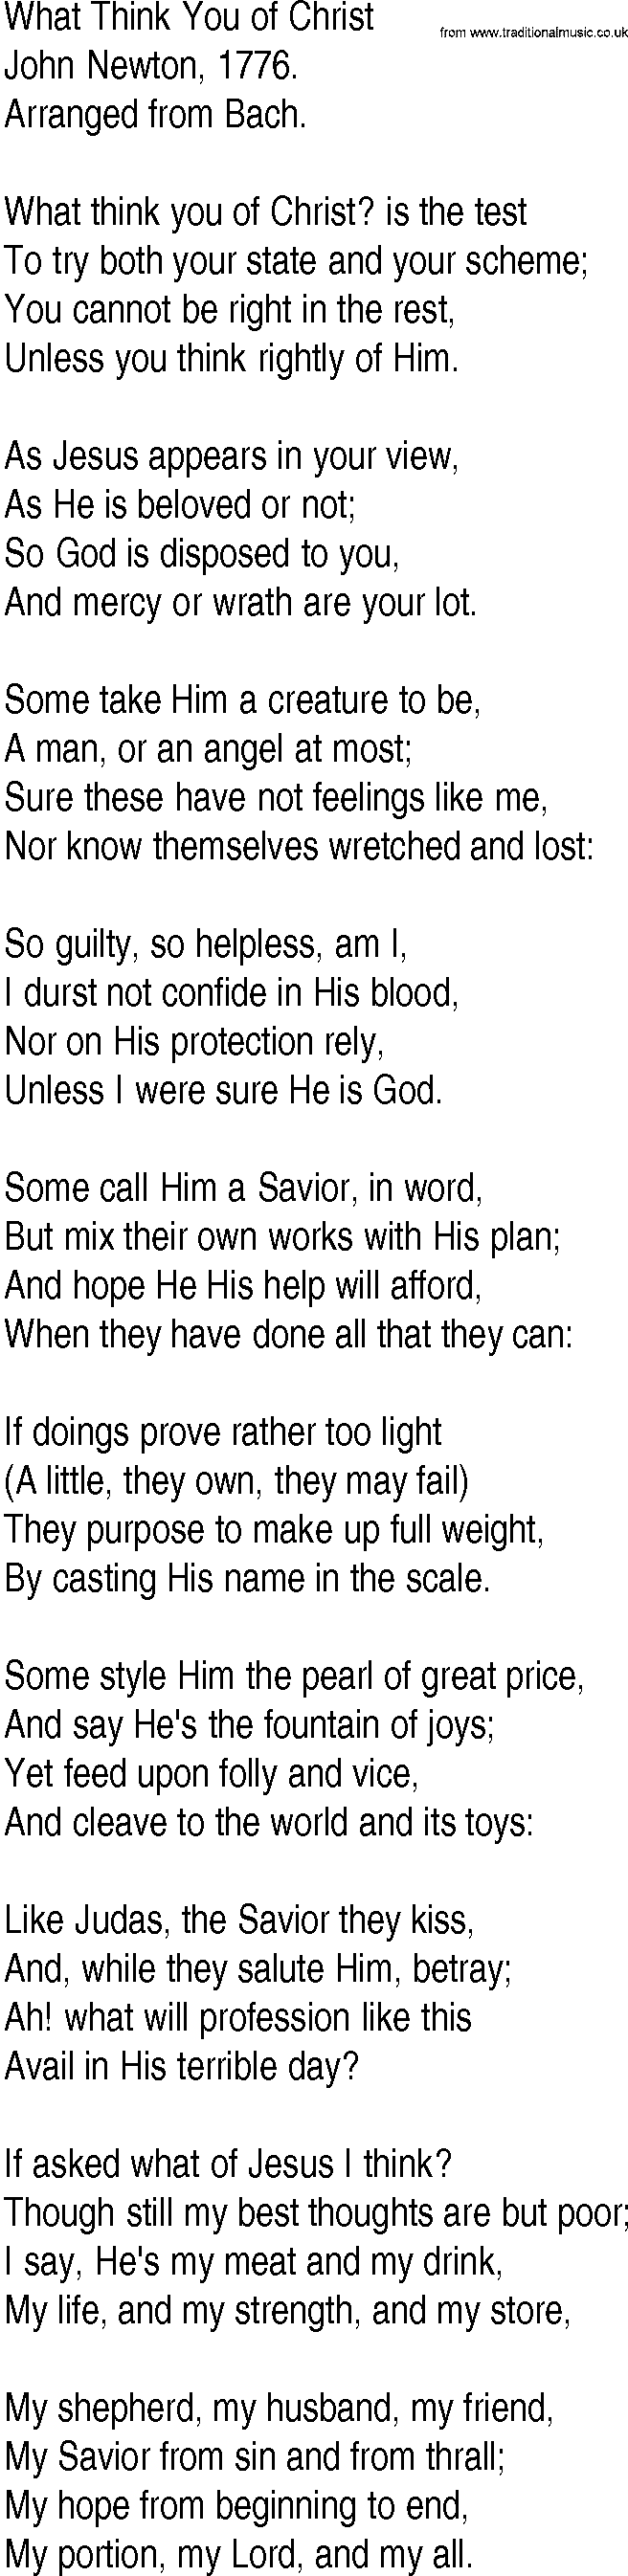 Hymn and Gospel Song: What Think You of Christ by John Newton lyrics